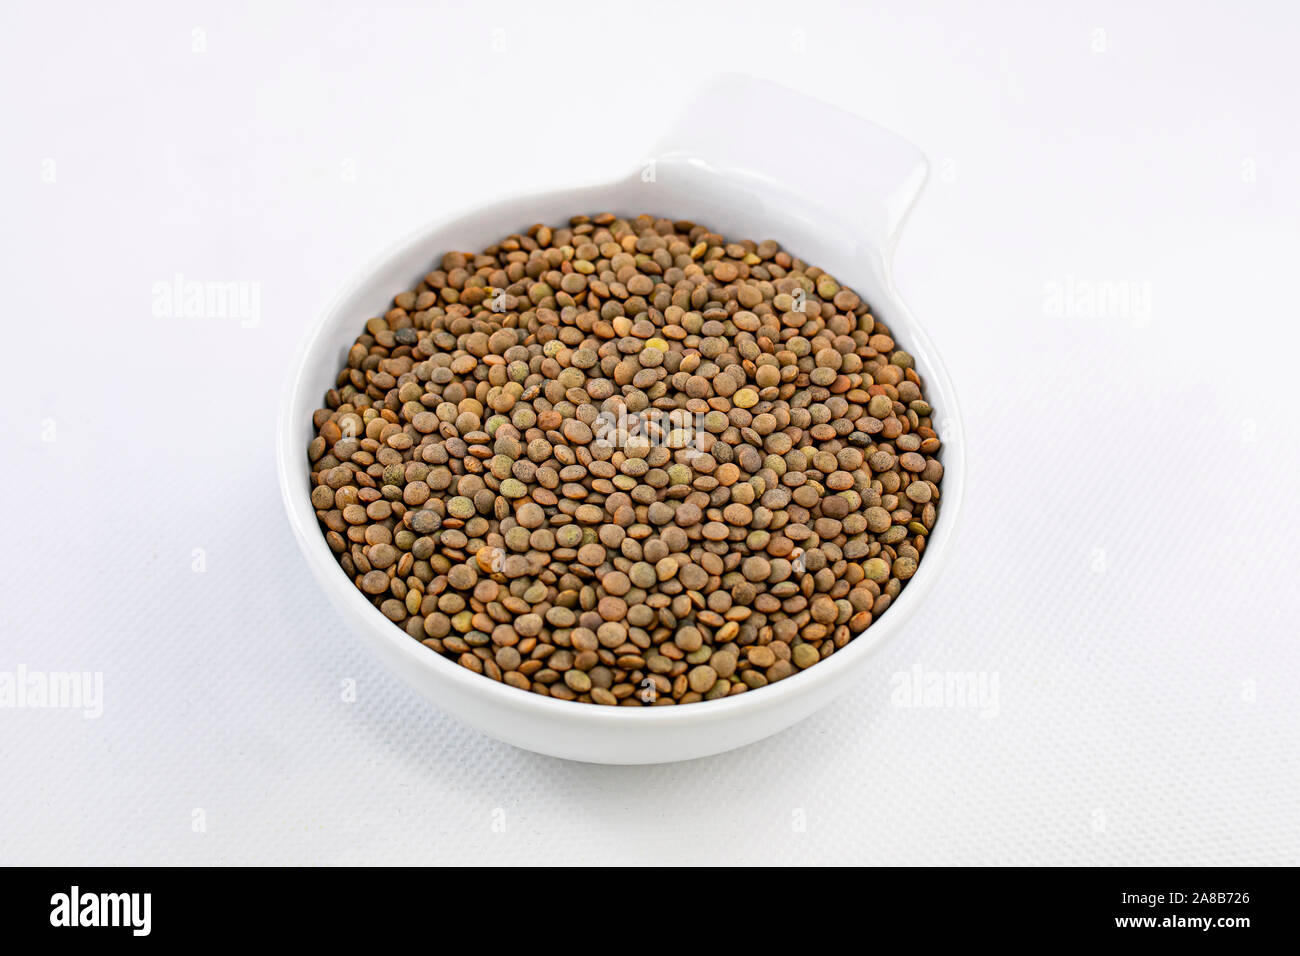 Top view and close up of a bowl with lentils on white background Stock Photo